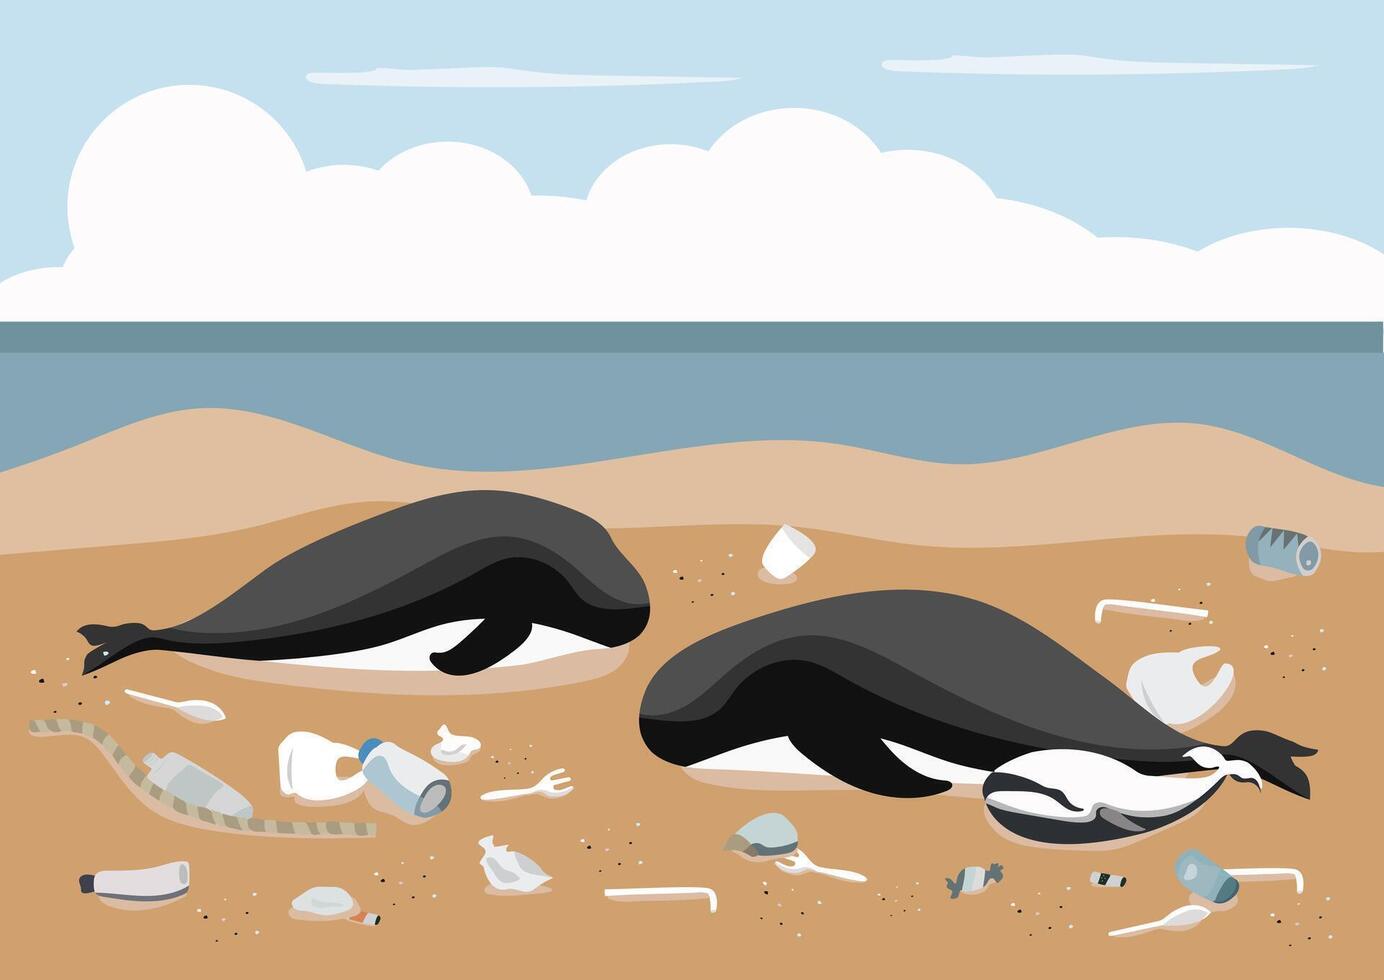 a whale family carcass stranded on beach with food waste and plastic pollution around background vector